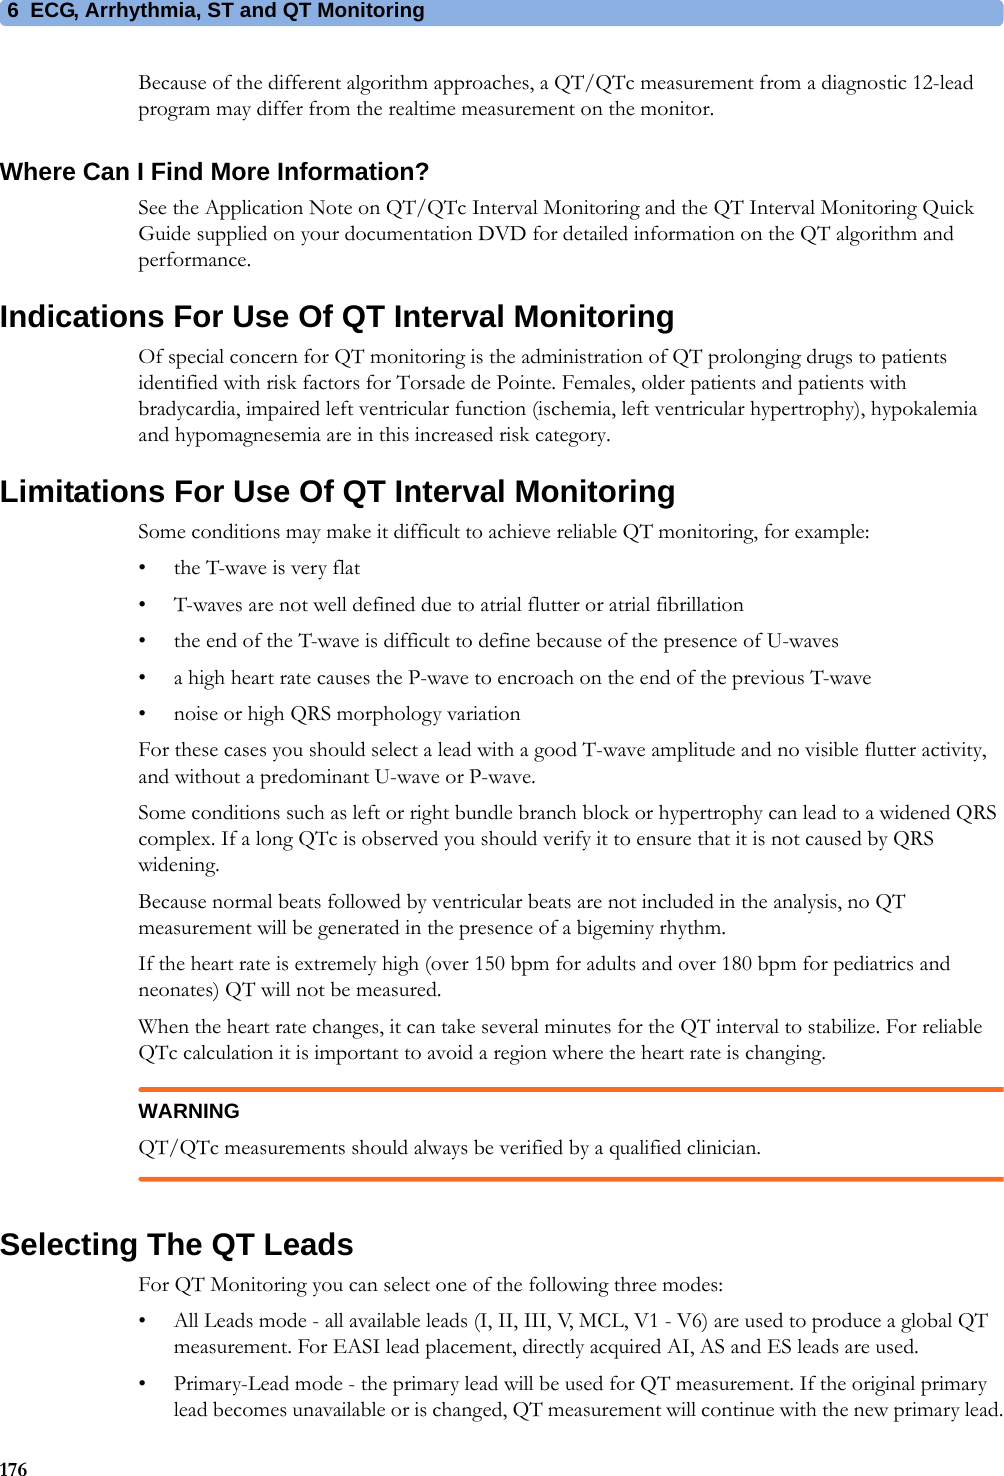 6 ECG, Arrhythmia, ST and QT Monitoring176Because of the different algorithm approaches, a QT/QTc measurement from a diagnostic 12-lead program may differ from the realtime measurement on the monitor.Where Can I Find More Information?See the Application Note on QT/QTc Interval Monitoring and the QT Interval Monitoring Quick Guide supplied on your documentation DVD for detailed information on the QT algorithm and performance.Indications For Use Of QT Interval MonitoringOf special concern for QT monitoring is the administration of QT prolonging drugs to patients identified with risk factors for Torsade de Pointe. Females, older patients and patients with bradycardia, impaired left ventricular function (ischemia, left ventricular hypertrophy), hypokalemia and hypomagnesemia are in this increased risk category.Limitations For Use Of QT Interval MonitoringSome conditions may make it difficult to achieve reliable QT monitoring, for example:• the T-wave is very flat• T-waves are not well defined due to atrial flutter or atrial fibrillation• the end of the T-wave is difficult to define because of the presence of U-waves• a high heart rate causes the P-wave to encroach on the end of the previous T-wave• noise or high QRS morphology variationFor these cases you should select a lead with a good T-wave amplitude and no visible flutter activity, and without a predominant U-wave or P-wave.Some conditions such as left or right bundle branch block or hypertrophy can lead to a widened QRS complex. If a long QTc is observed you should verify it to ensure that it is not caused by QRS widening.Because normal beats followed by ventricular beats are not included in the analysis, no QT measurement will be generated in the presence of a bigeminy rhythm.If the heart rate is extremely high (over 150 bpm for adults and over 180 bpm for pediatrics and neonates) QT will not be measured.When the heart rate changes, it can take several minutes for the QT interval to stabilize. For reliable QTc calculation it is important to avoid a region where the heart rate is changing.WARNINGQT/QTc measurements should always be verified by a qualified clinician.Selecting The QT LeadsFor QT Monitoring you can select one of the following three modes:• All Leads mode - all available leads (I, II, III, V, MCL, V1 - V6) are used to produce a global QT measurement. For EASI lead placement, directly acquired AI, AS and ES leads are used.• Primary-Lead mode - the primary lead will be used for QT measurement. If the original primary lead becomes unavailable or is changed, QT measurement will continue with the new primary lead.